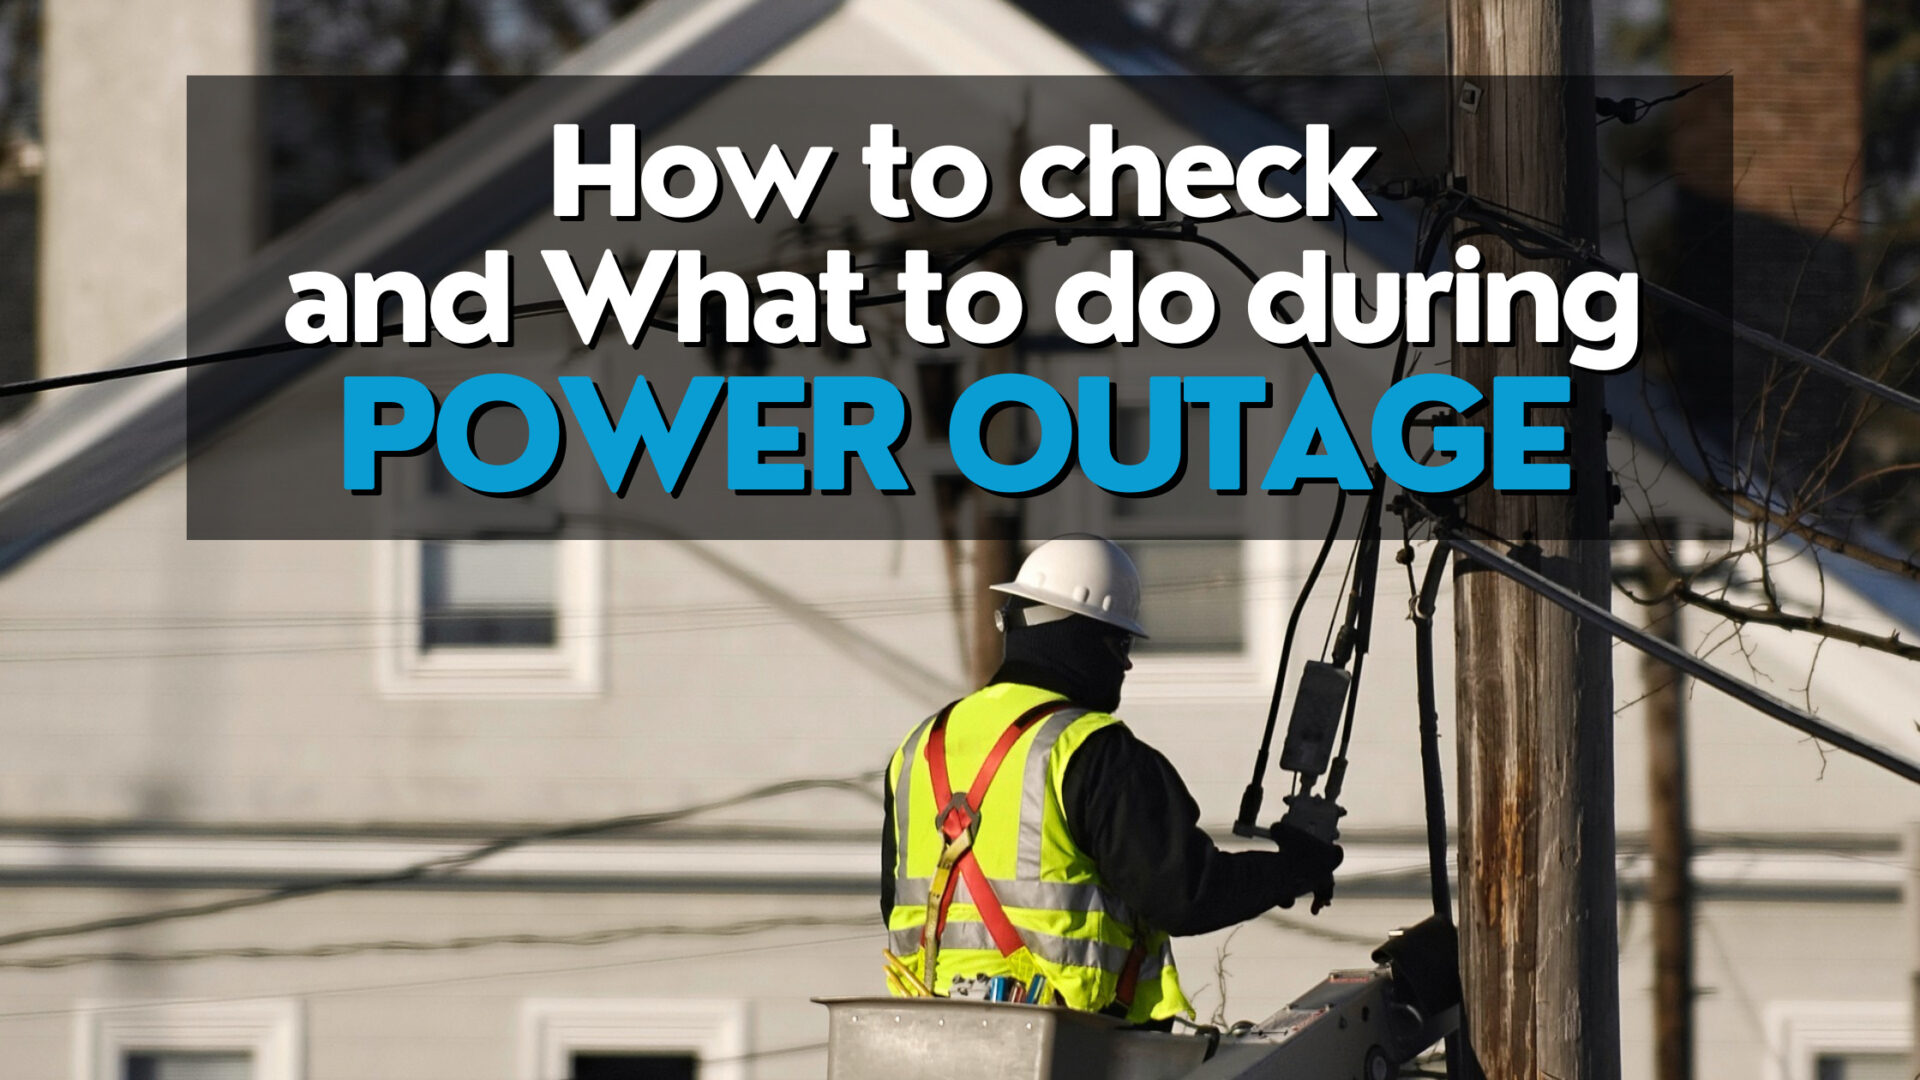 What to Do During Power Outage